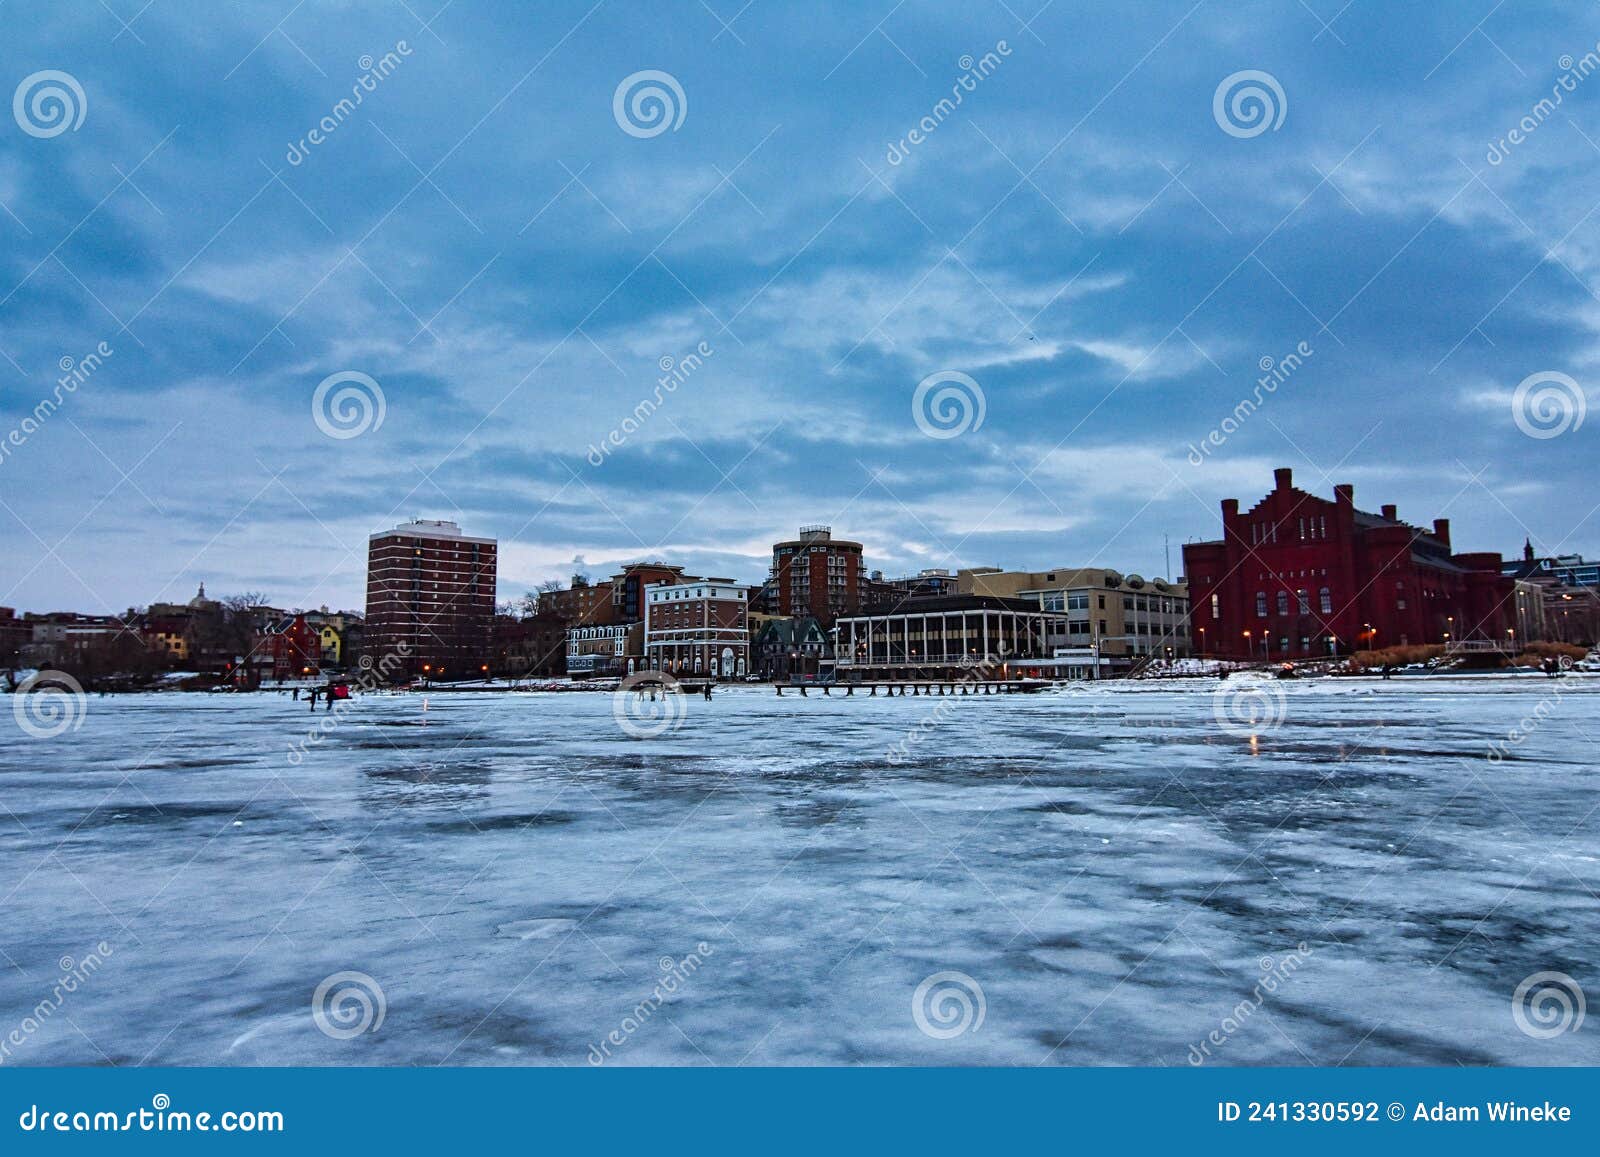 view of downtown madison, the red gym and several other buildings from frozen lake mendota